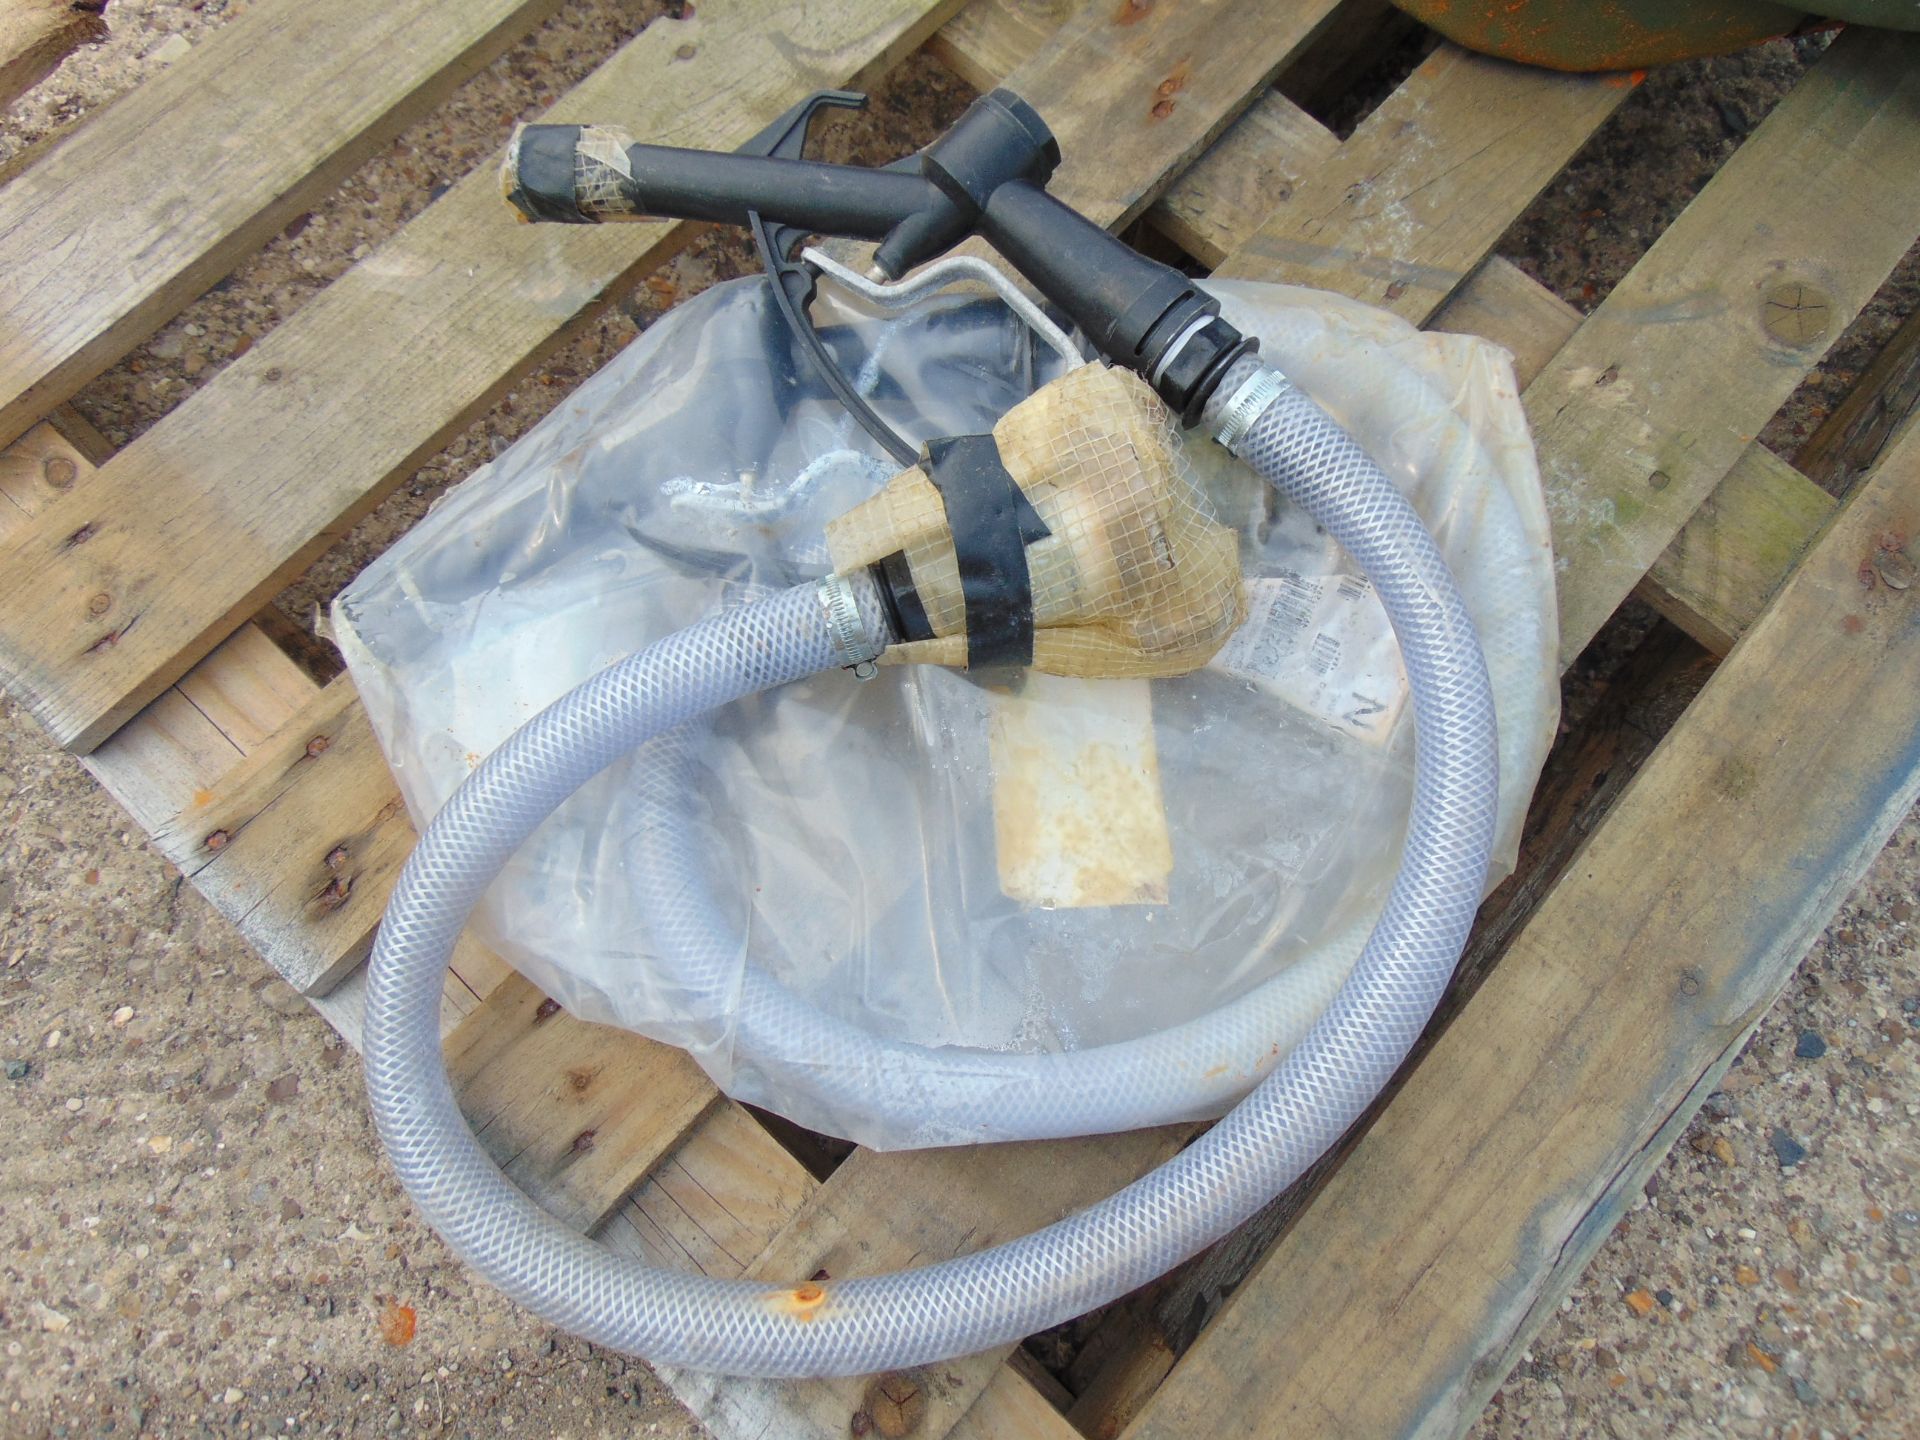 2 x Unissued Diesel Gravity Refueling Hose Kit c/w Nozzle and Valve as Shown